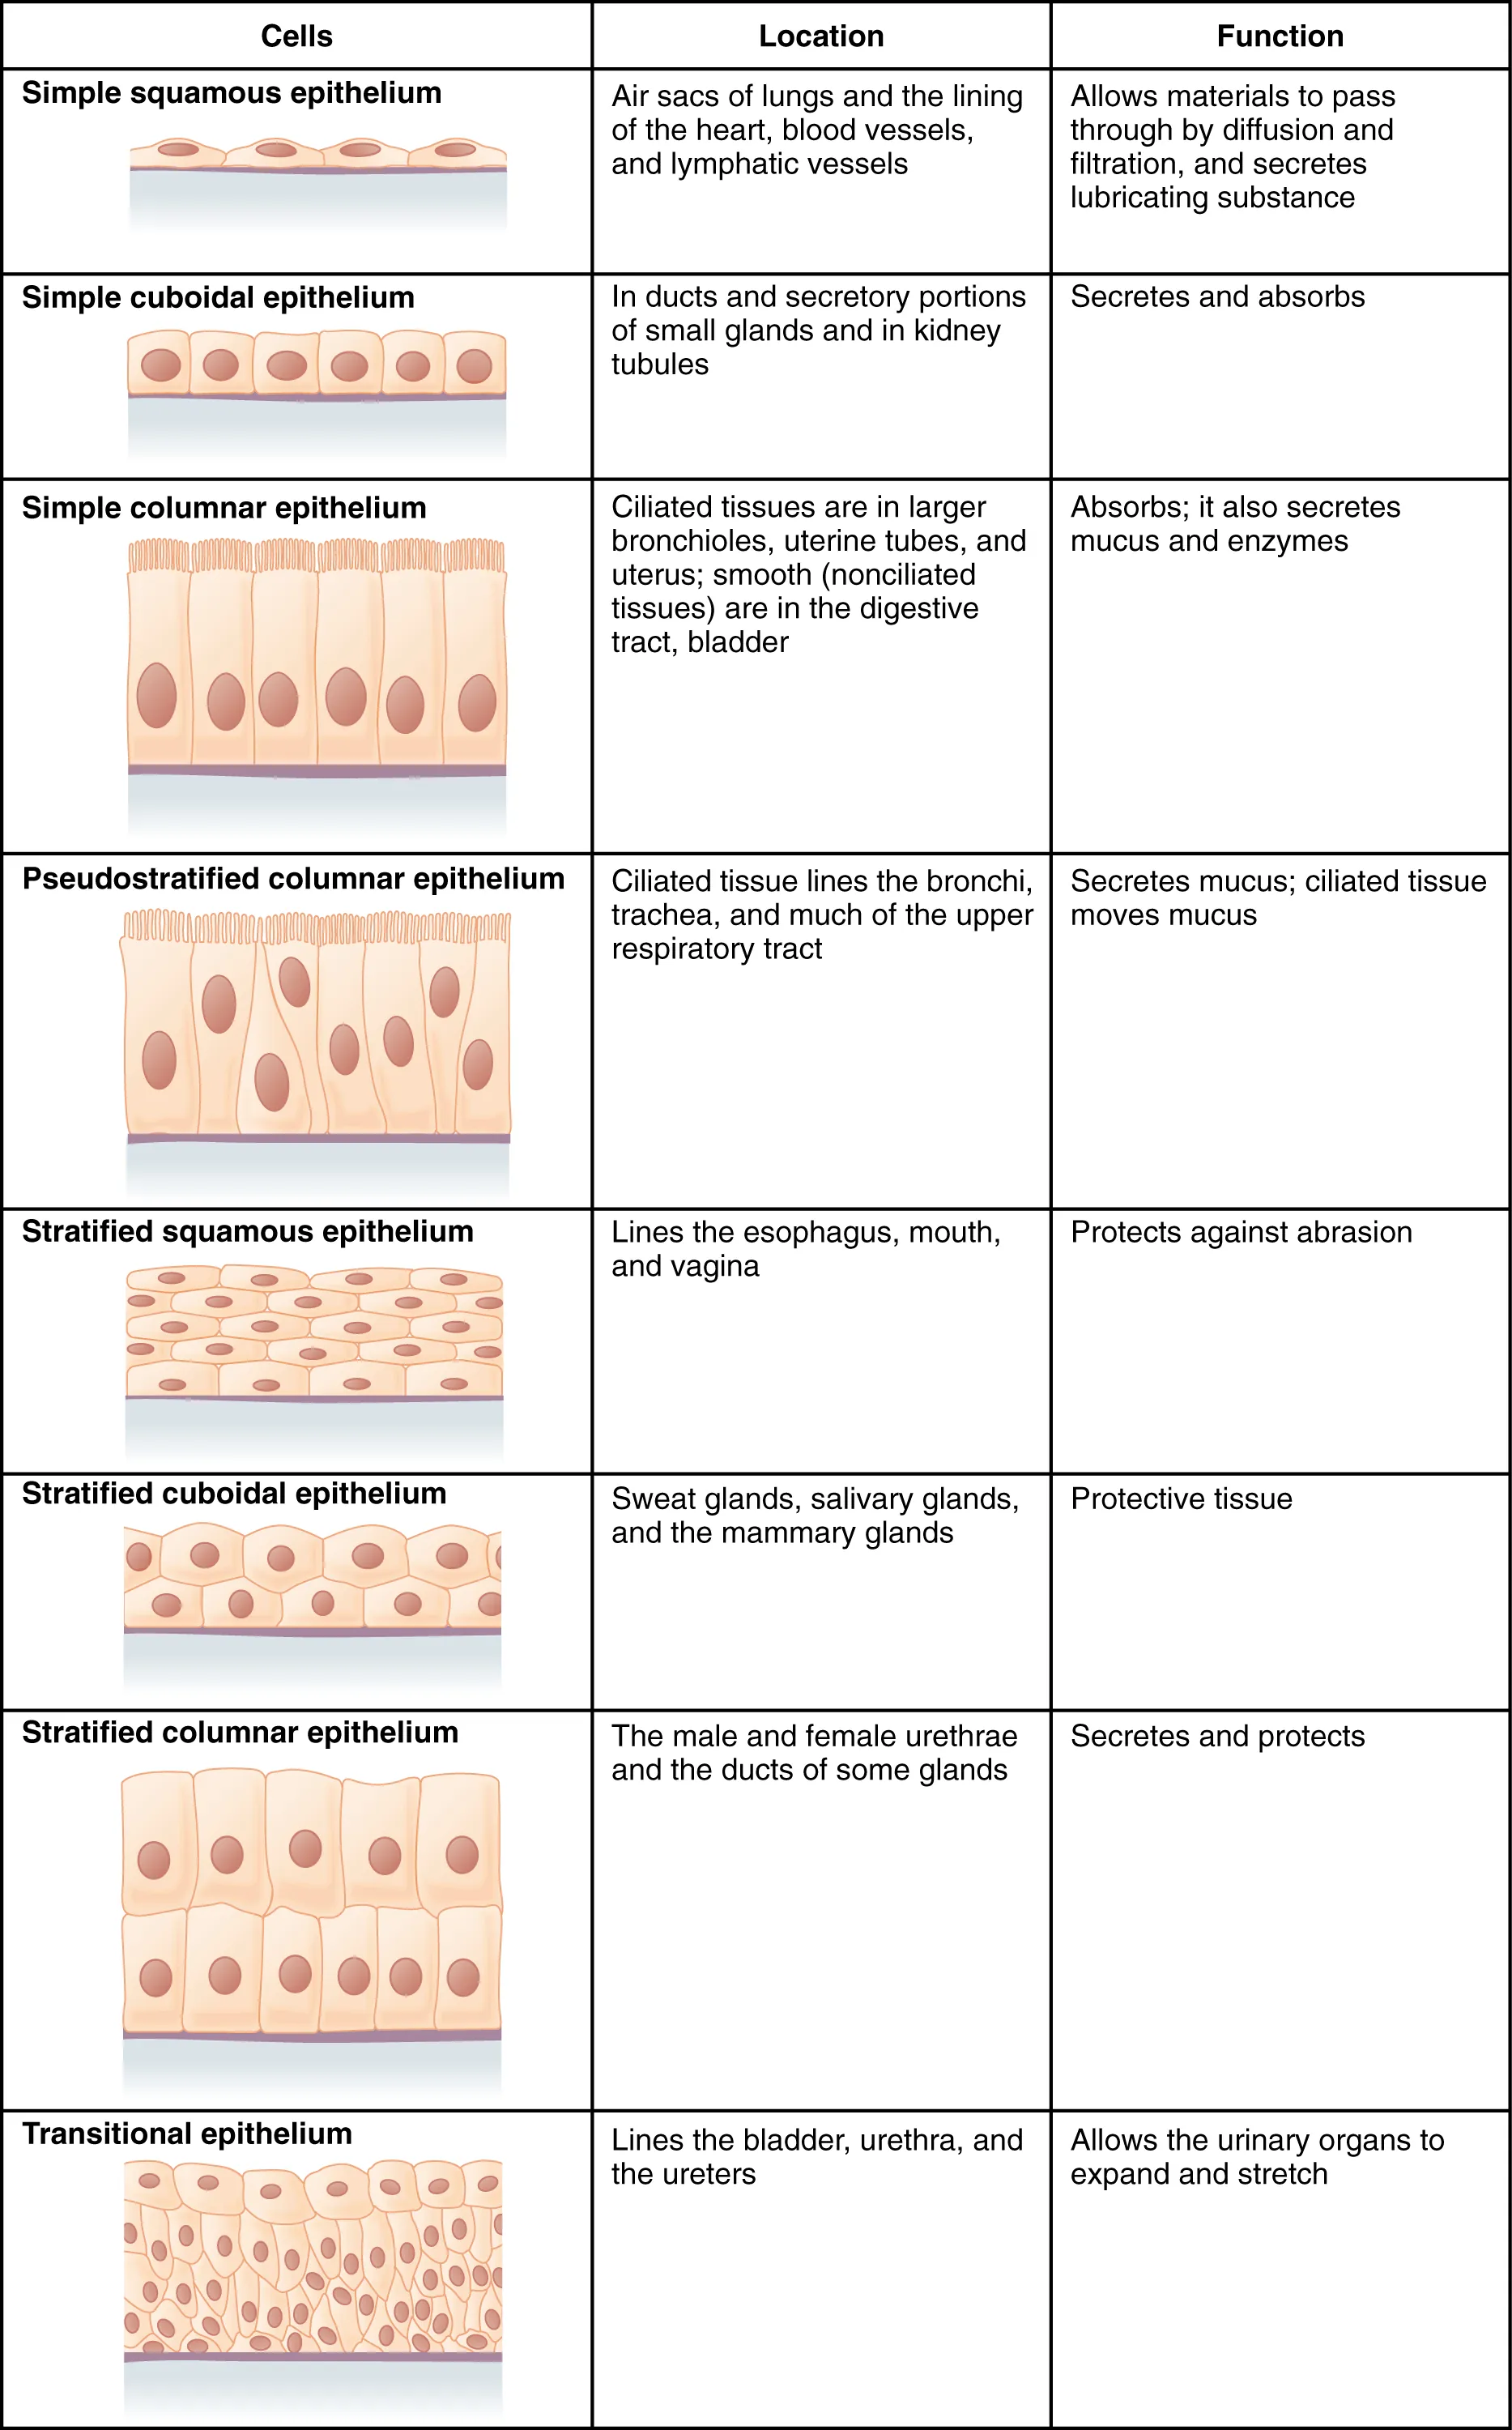 This figure is a table with three columns and eight rows. The leftmost column is titled cells, and contains a drawing in each row showing how epithelial cells are arranged above a basement membrane. The middle column is titled location, while the rightmost column is titled function. In a simple squamous epithelium, the cells are flattened and single-layered. Simple squamous cells are found in the air sacs of the lungs, in the lining of the heart, blood vessels and lymphatic vessels. Their function is to allow materials to pass through by diffusion and filtration, as well as to secrete lubricating substances. In a simple cuboidal epithelium, the cells are cube shaped and single layered and located in ducts and secretory portions of small glands as well as in the kidney tubules. The function of simple cuboidal epithelium is to secrete and absorb. In a simple columnar epithelium, the cells are rectangular and are attached to the basement membrane on one of their narrow sides, so that each cell is standing up like a column. There is only one layer of cells. Simple columnar epithelium is found in ciliated tissues including the larger bronchioles, uterine tubes, and uterus, as well as in smooth, nonciliated tissues such as the digestive tract bladder. The function of simple columnar epithelium is to absorb substances but also to secrete mucous and enzymes. In a pseudostratified columnar epithelium, the cells are column-like in appearance, but they vary in height. The taller cells bend over the tops of the shorter cells so that the top of the epithelial tissue is continuous. There is only one layer of cells. Pseudostratified columnar epithelium lines the bronchi, the trachea, and much of the upper respiratory tract. The function of pseudostratified columnar epithelium is to secrete mucous and also move that mucus using the hair like cilia projecting from the top of each cell. A stratified squamous epithelium contains many layers of flattened cells. Stratified squamous epithelium lines the esophagus, mouth, and vagina. The function of stratified squamous epithelium is to protect against abrasion. Stratified cuboidal epithelium contains many layers of cube-shaped cells. Stratified cuboidal epithelium is found in the sweat glands, salivary glands, and mammary glands. The function of stratified cuboidal epithelium is to protect other tissues of the body. Stratified columnar epithelium contains many layers of rectangular, column-shaped cells. Stratified columnar epithelium is located in the male and female urethrae and the ducts of some glands. The function of stratified columnar epithelium is to secrete and protect. Transitional epithelium consists of many layers of irregularly shaped cells with diverse sizes. Transitional epithelium is found lining the bladder, urethra and ureters. The function of transitional epithelium is to allow the urinary organs to expand and stretch.